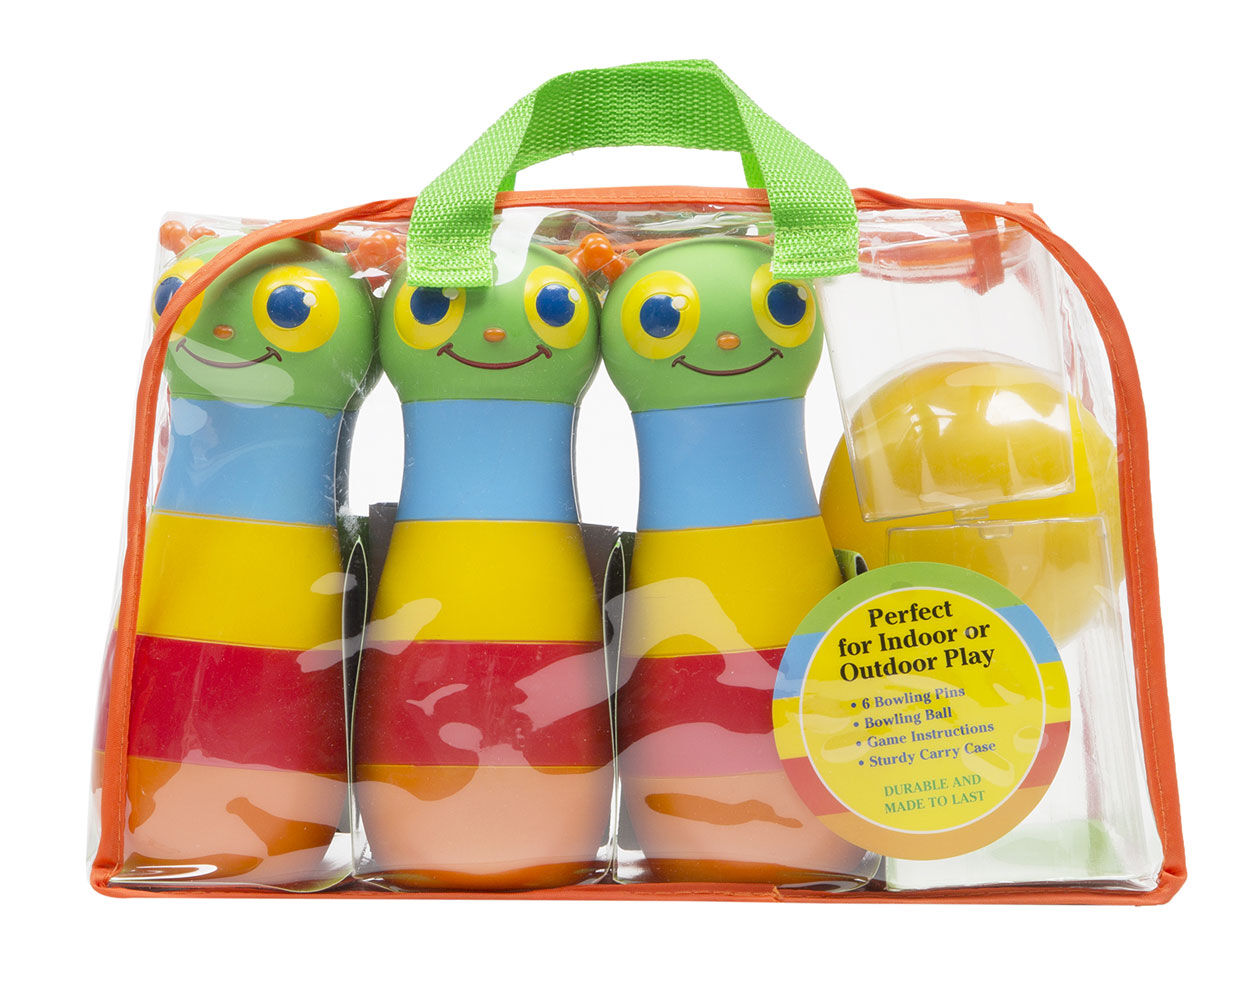 melissa and doug cleaning set toys r us